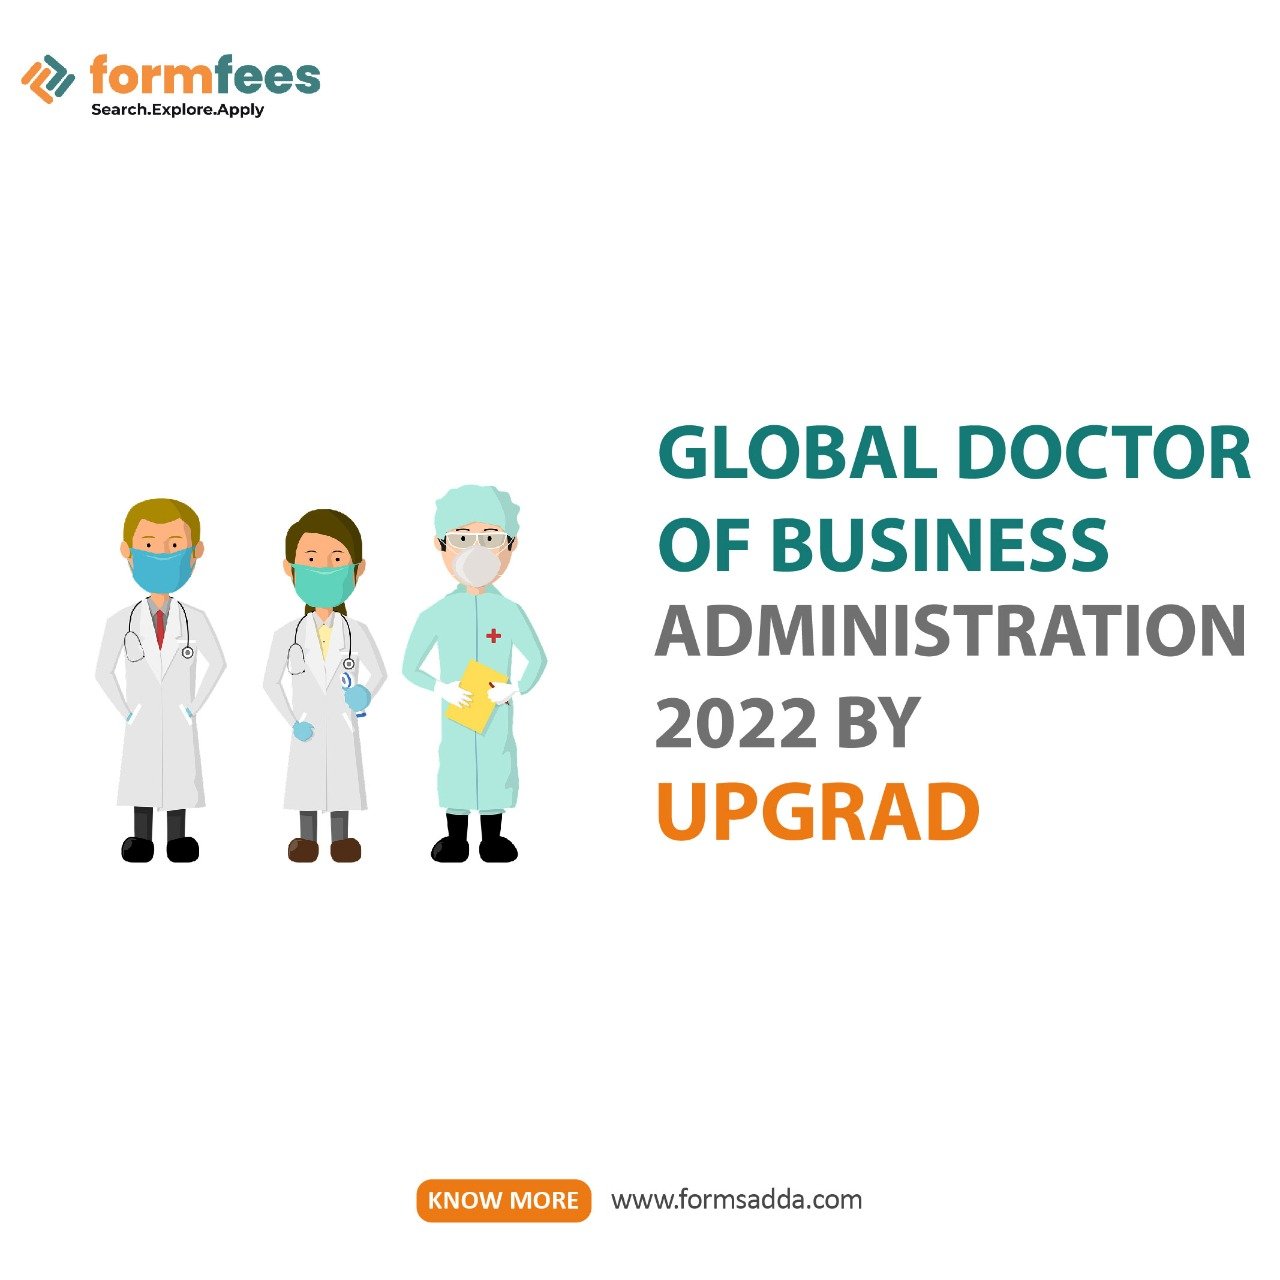 Global Doctor of Business Administration 2022 by upGrad